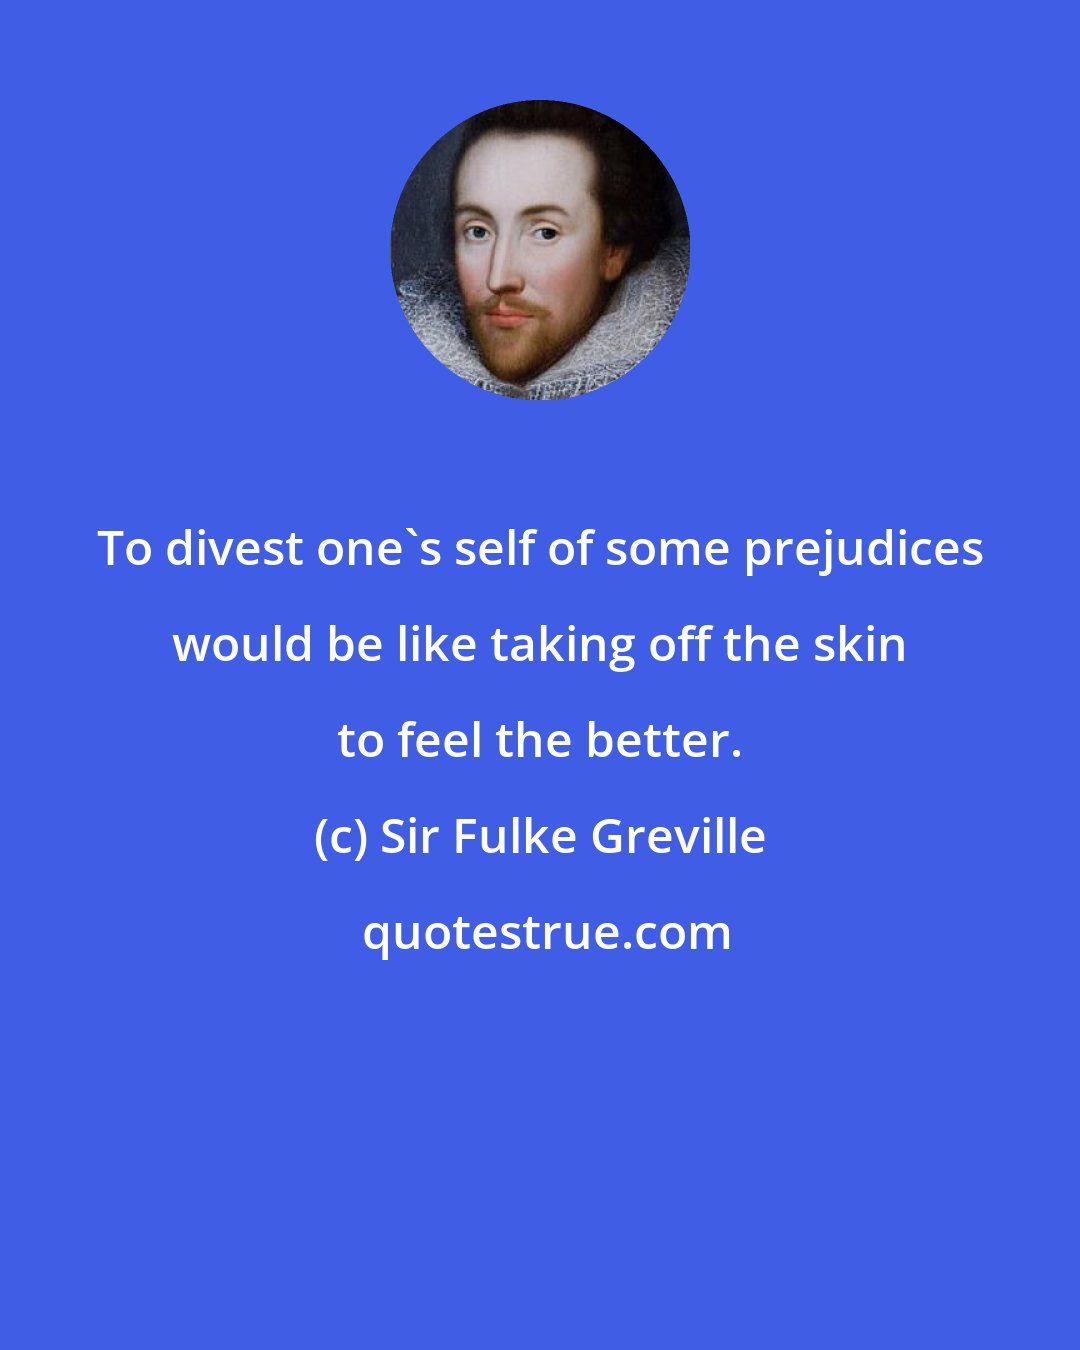 Sir Fulke Greville: To divest one's self of some prejudices would be like taking off the skin to feel the better.